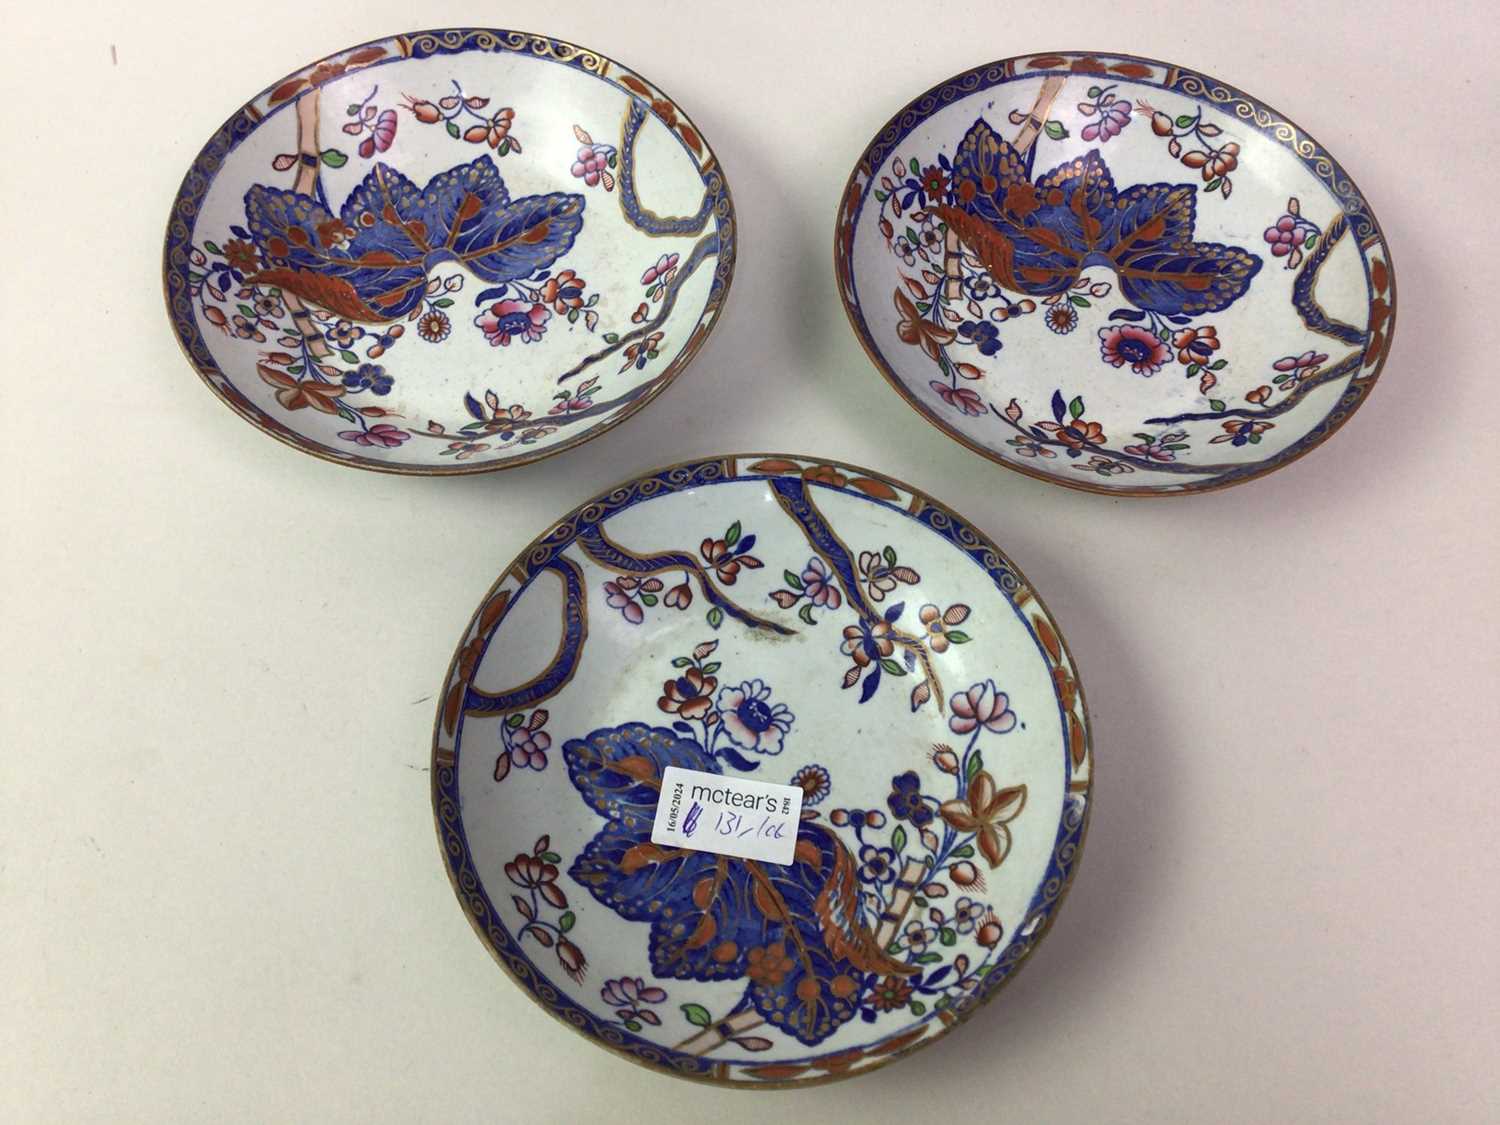 NAUTALIS PORCELAIN CUP, SAUCER, SIDE PLATE AND BISCUIT PLATE, ALONG WITH 18TH CENTURY AND LATER ENGL - Image 7 of 7